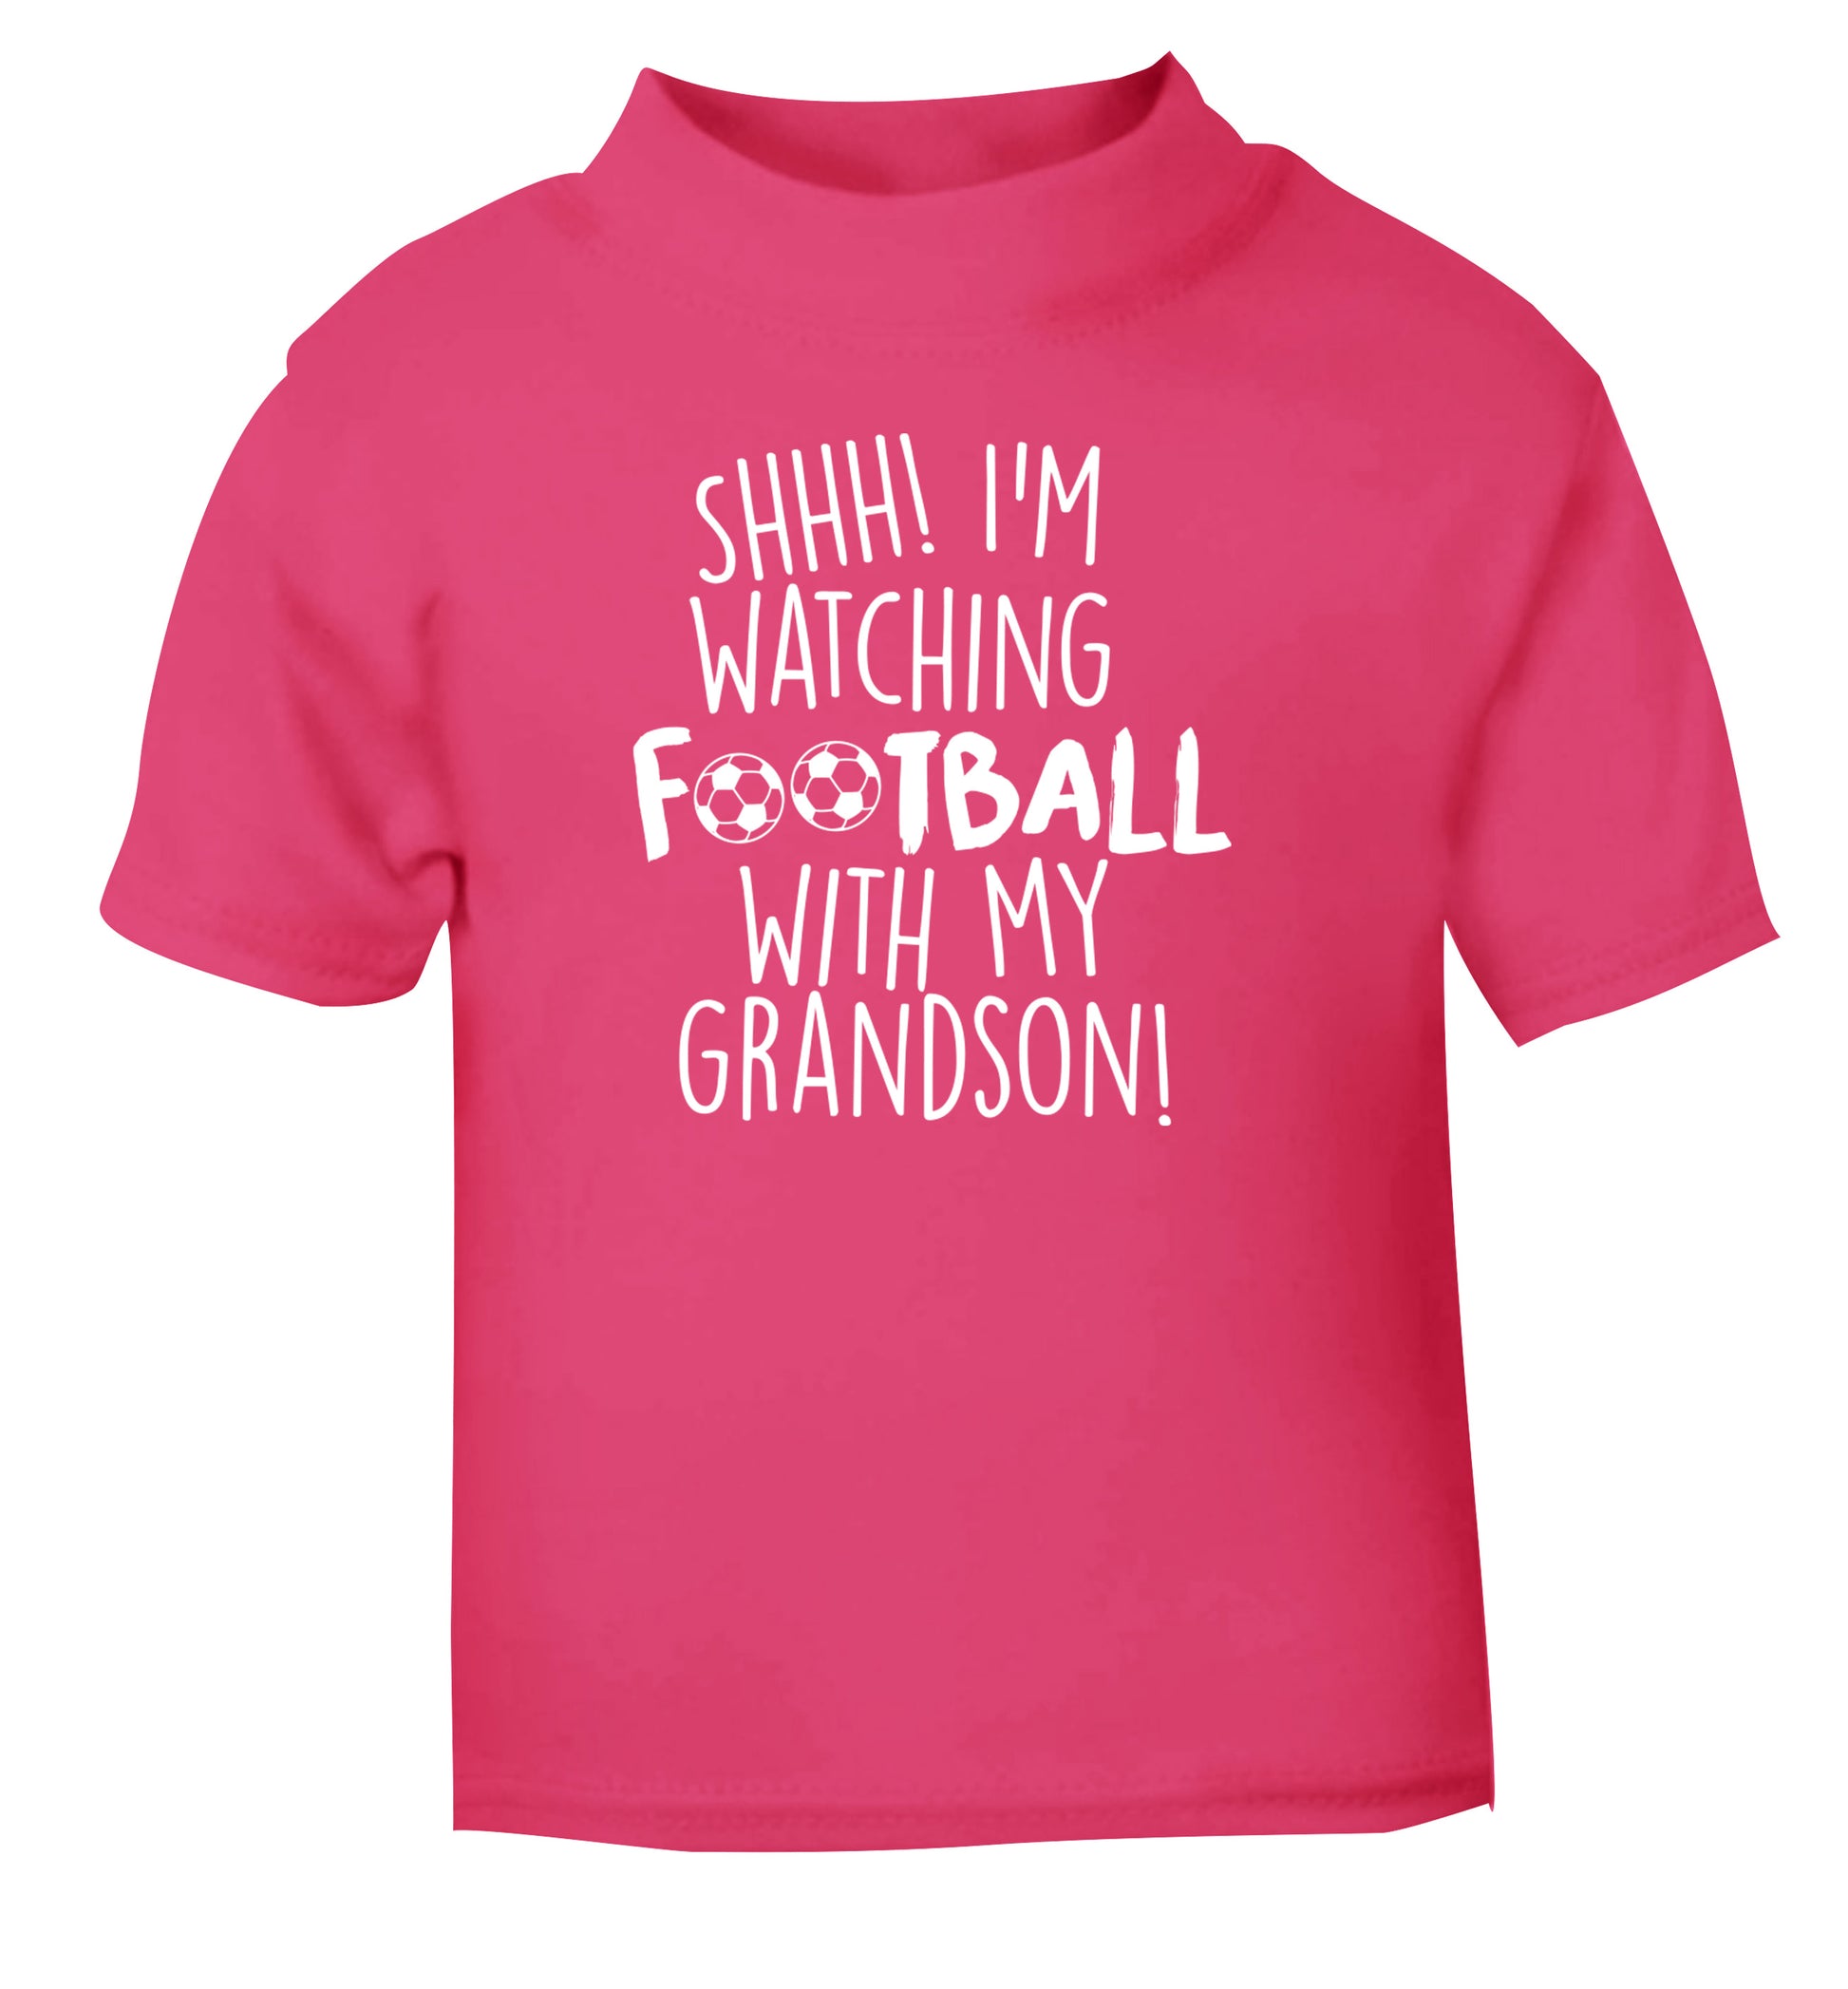 Shhh I'm watching football with my grandson pink Baby Toddler Tshirt 2 Years